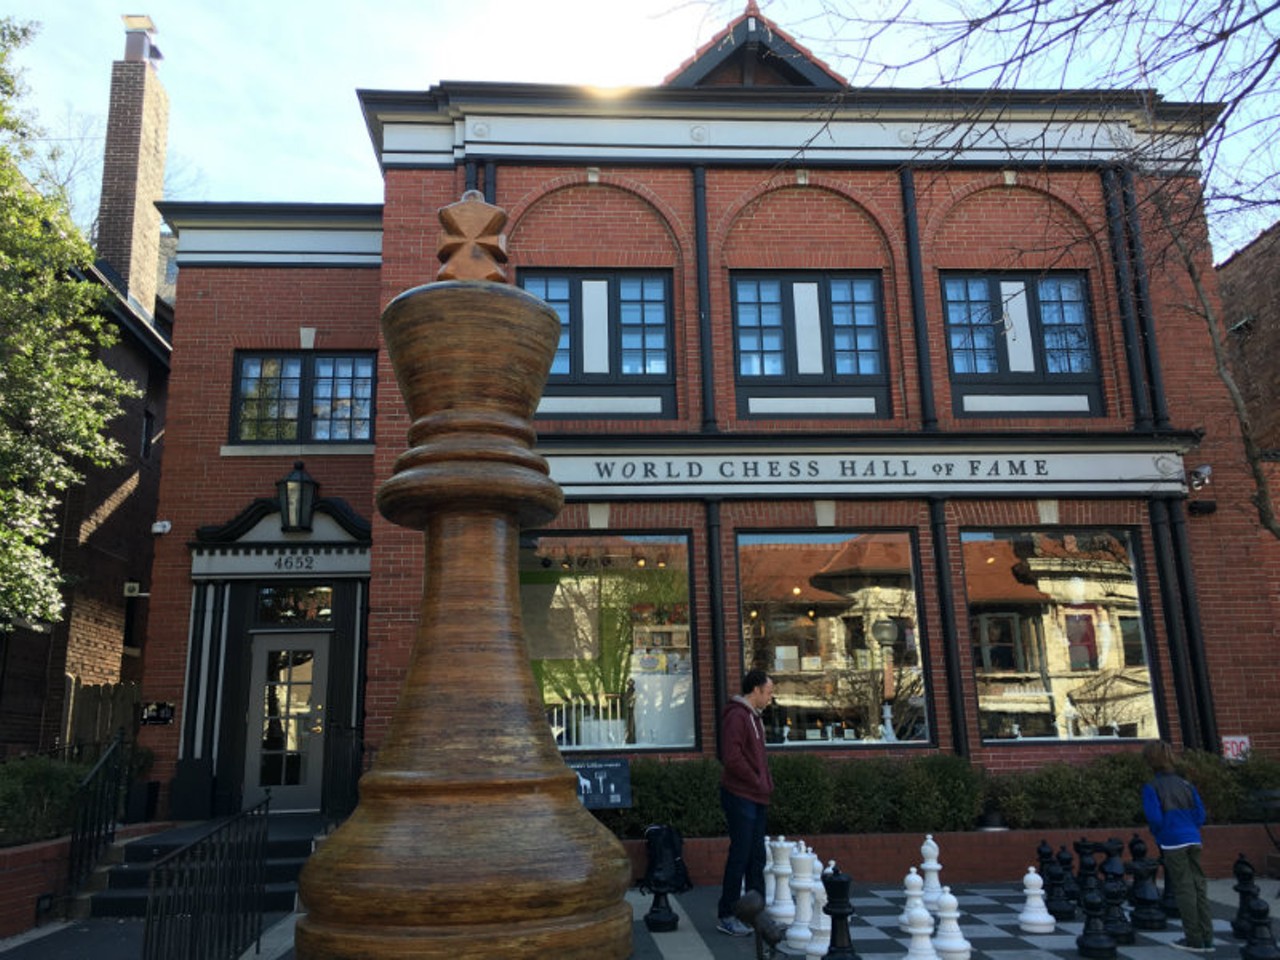 Stop being a philistine shithead and learn to play chess.
St. Louis is home to the World Chess Hall of Fame, and you can learn the game across the street at the Chess Club and Scholastic Center of Saint Louis. You have no excuses. Photo by Elizabeth Semko.